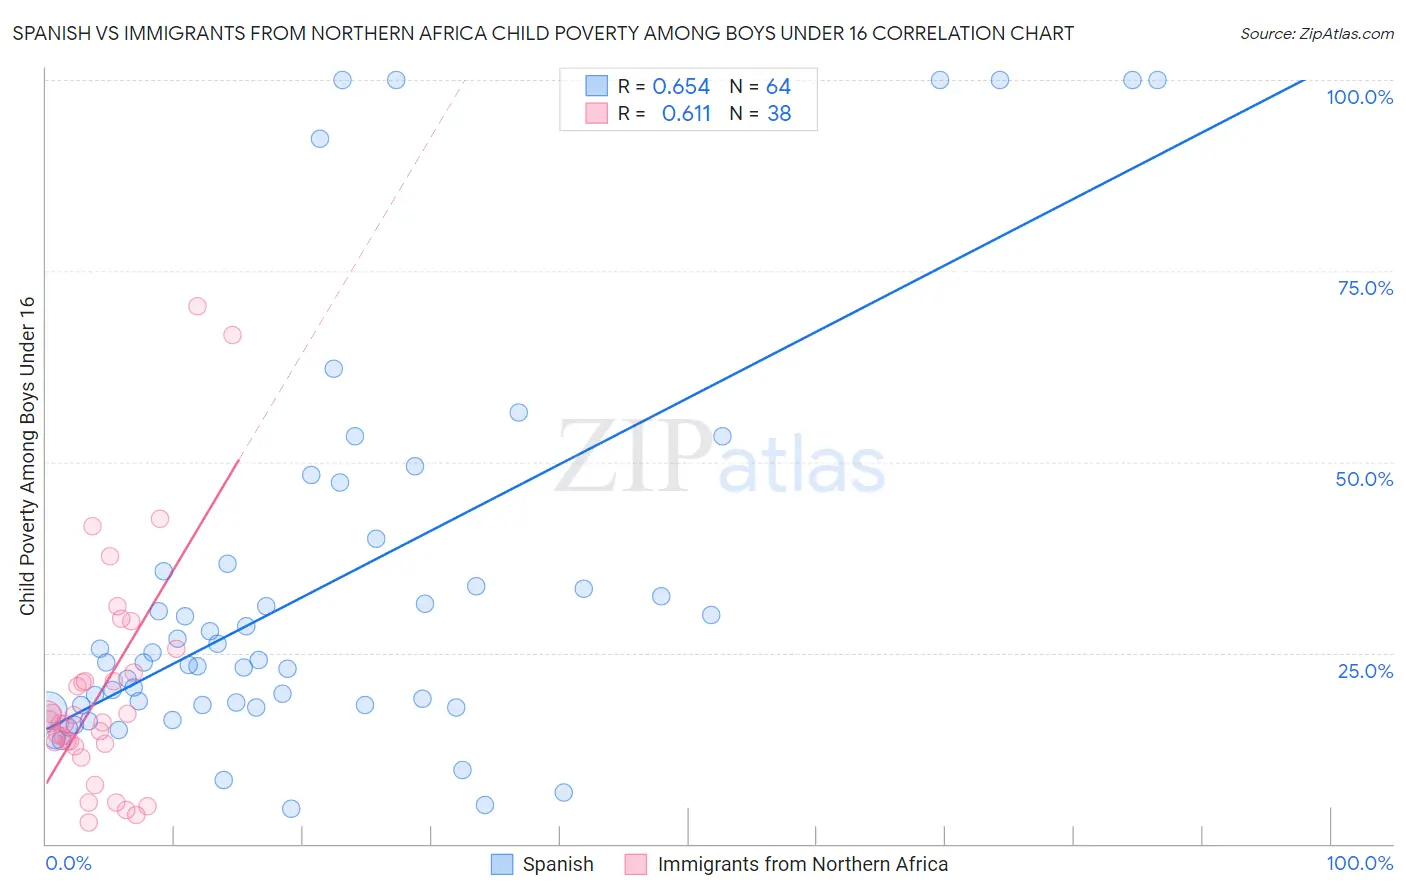 Spanish vs Immigrants from Northern Africa Child Poverty Among Boys Under 16